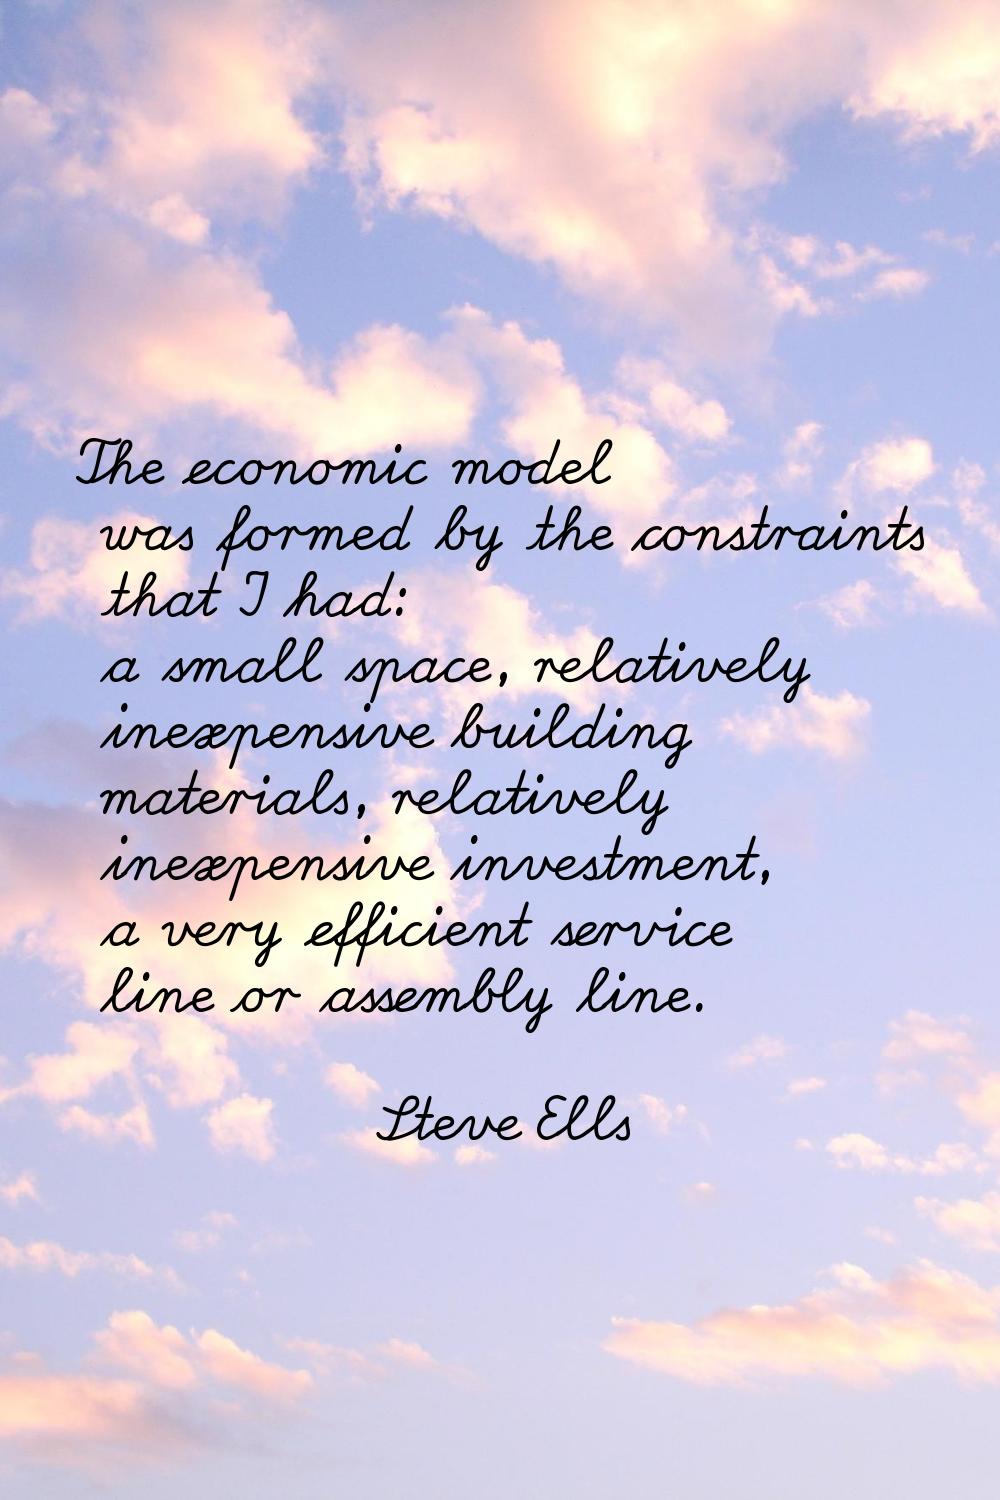 The economic model was formed by the constraints that I had: a small space, relatively inexpensive 